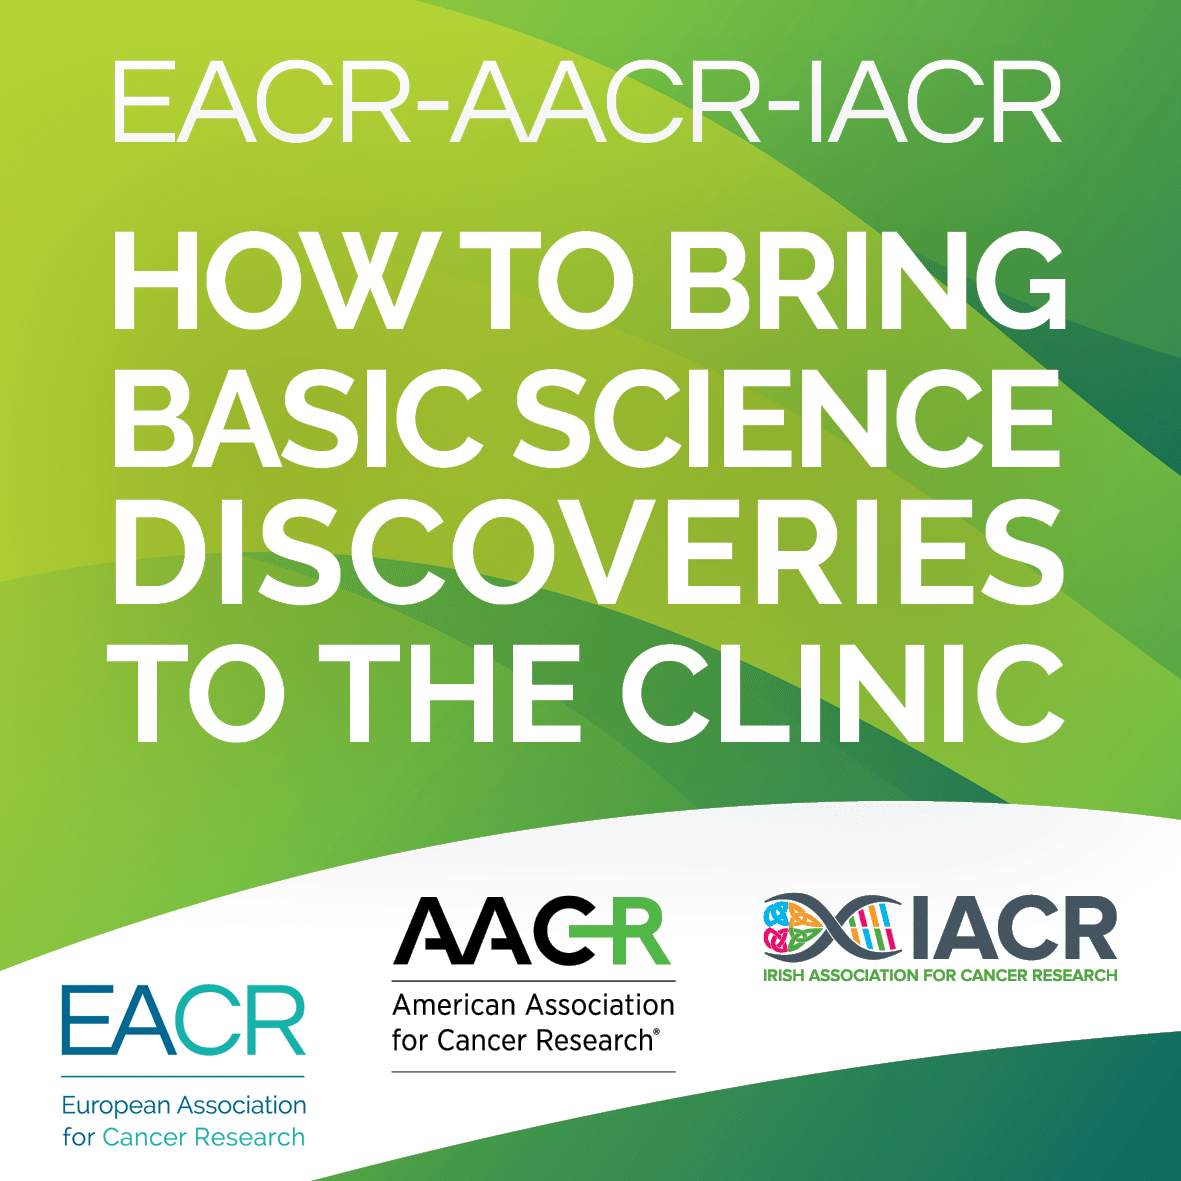 EACR-AACR Basic & Translational Research Conference in partnership with IACR